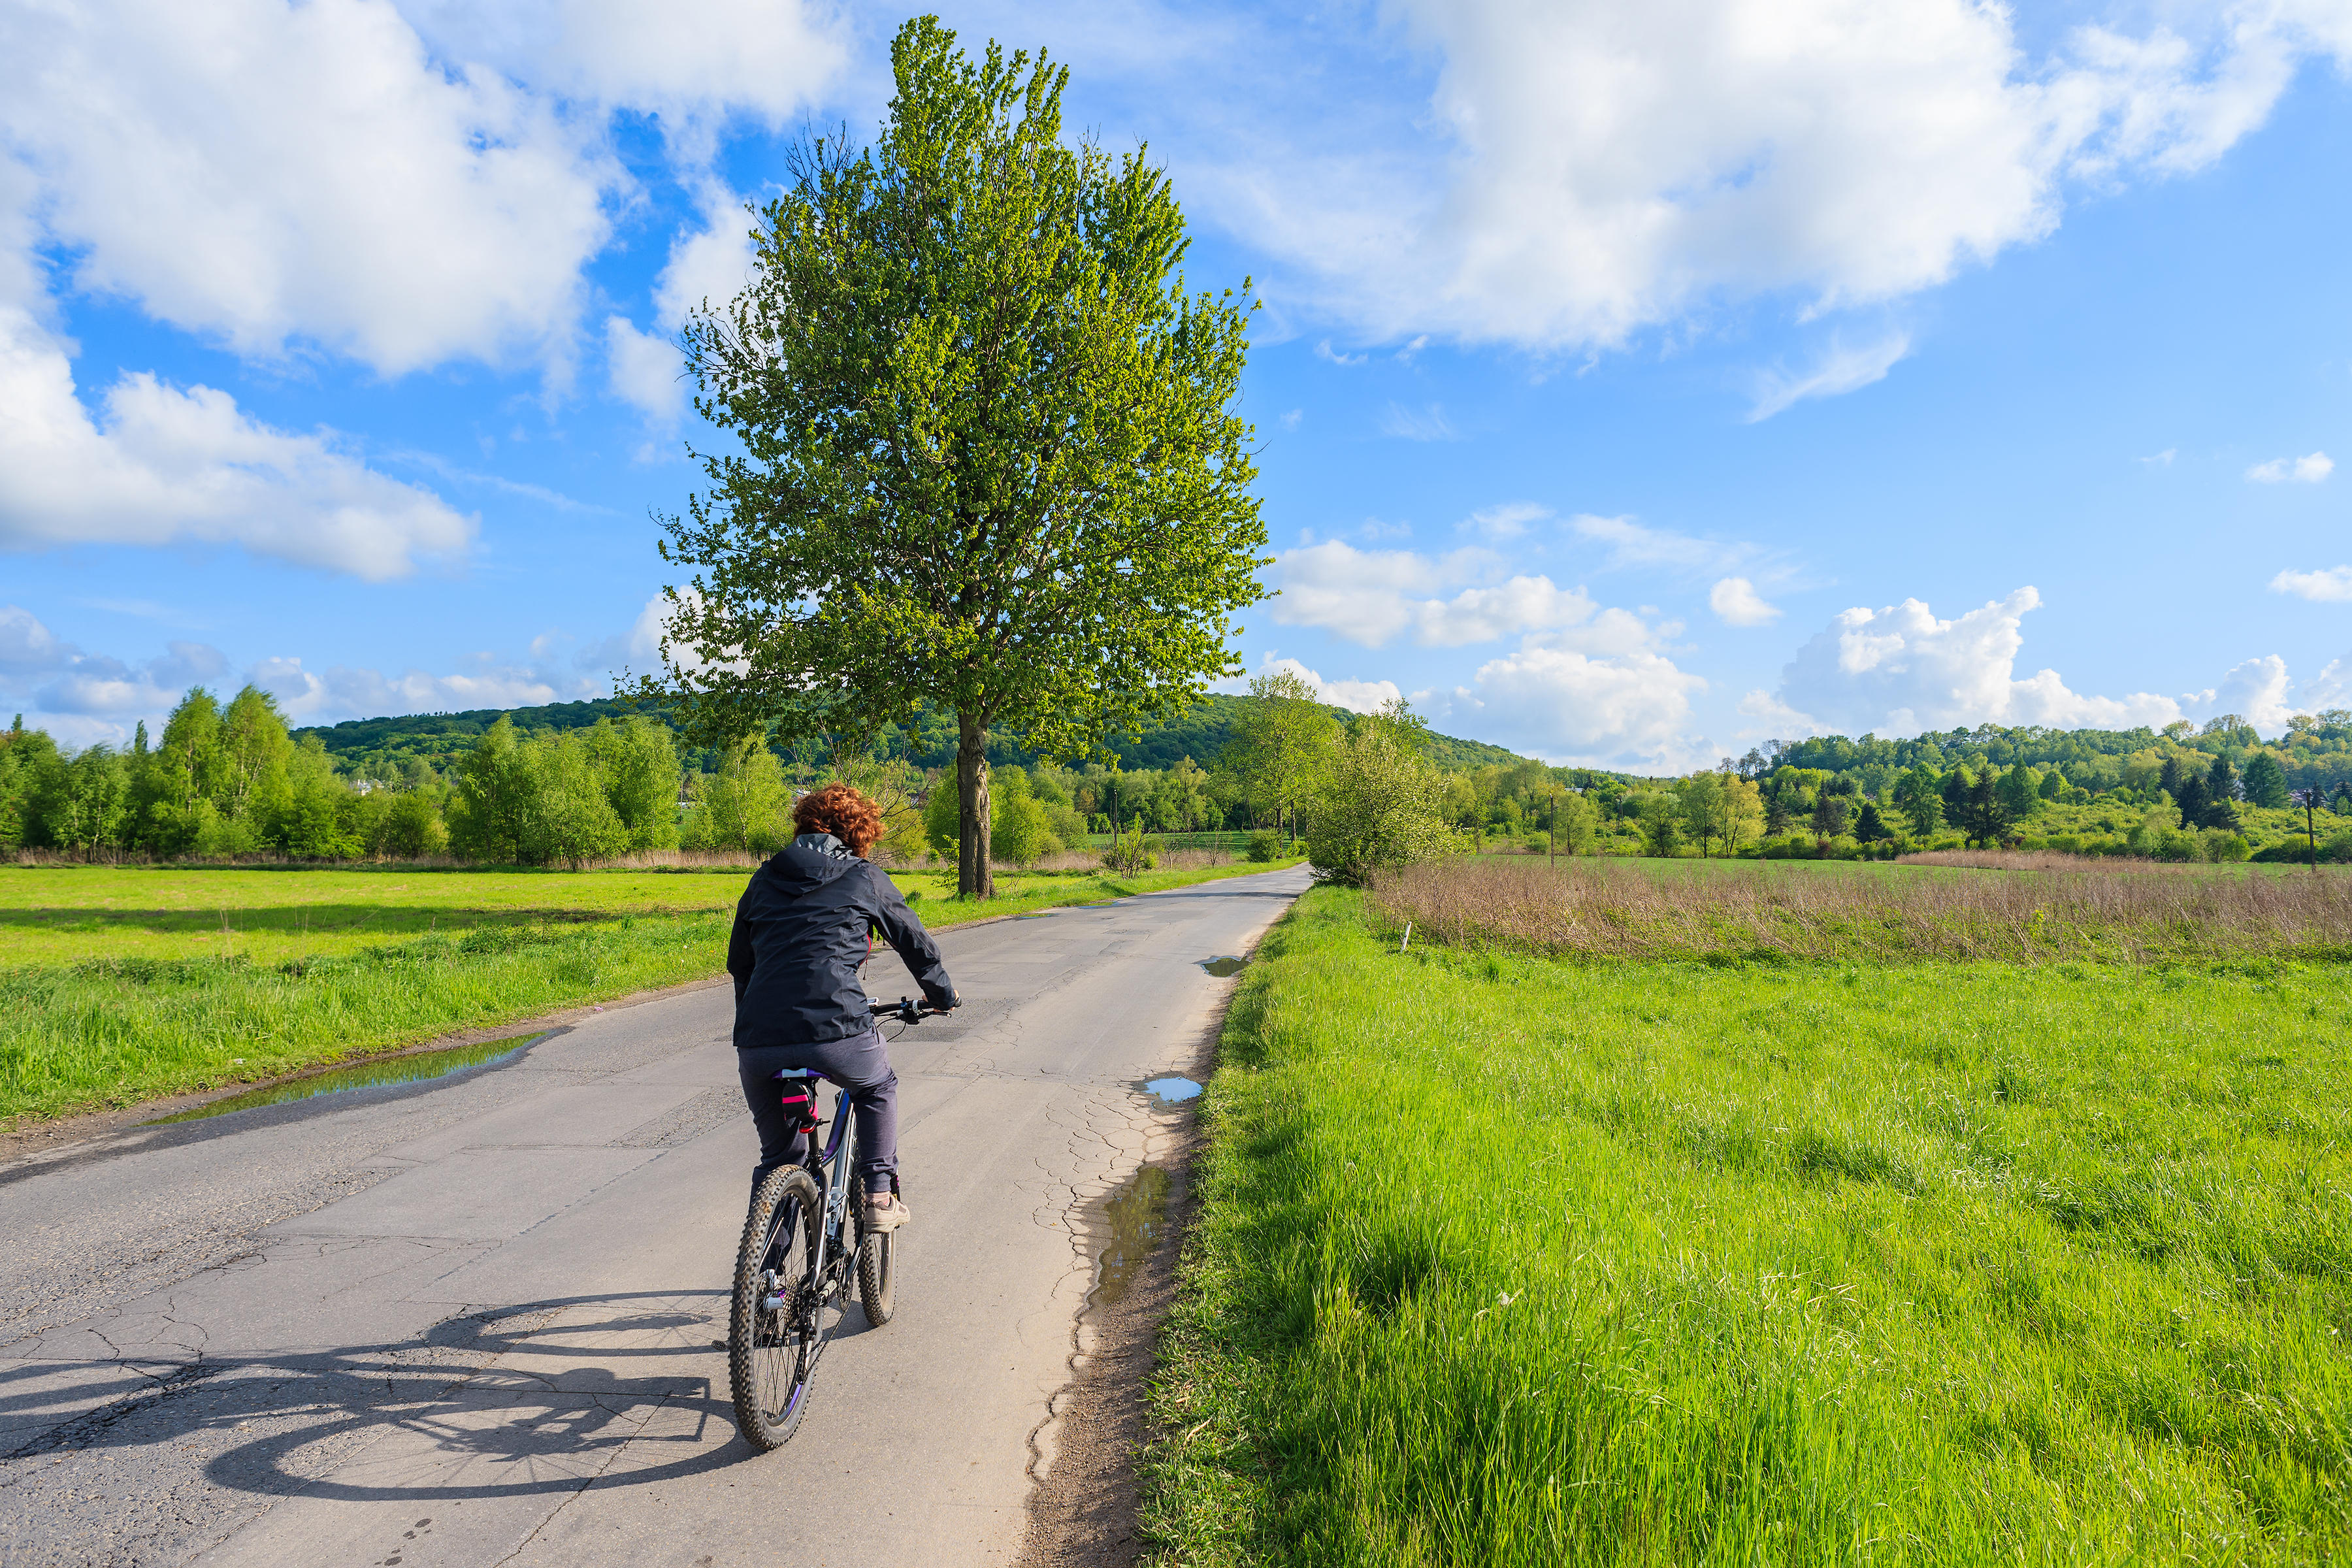 A woman riding a bike in a rural area